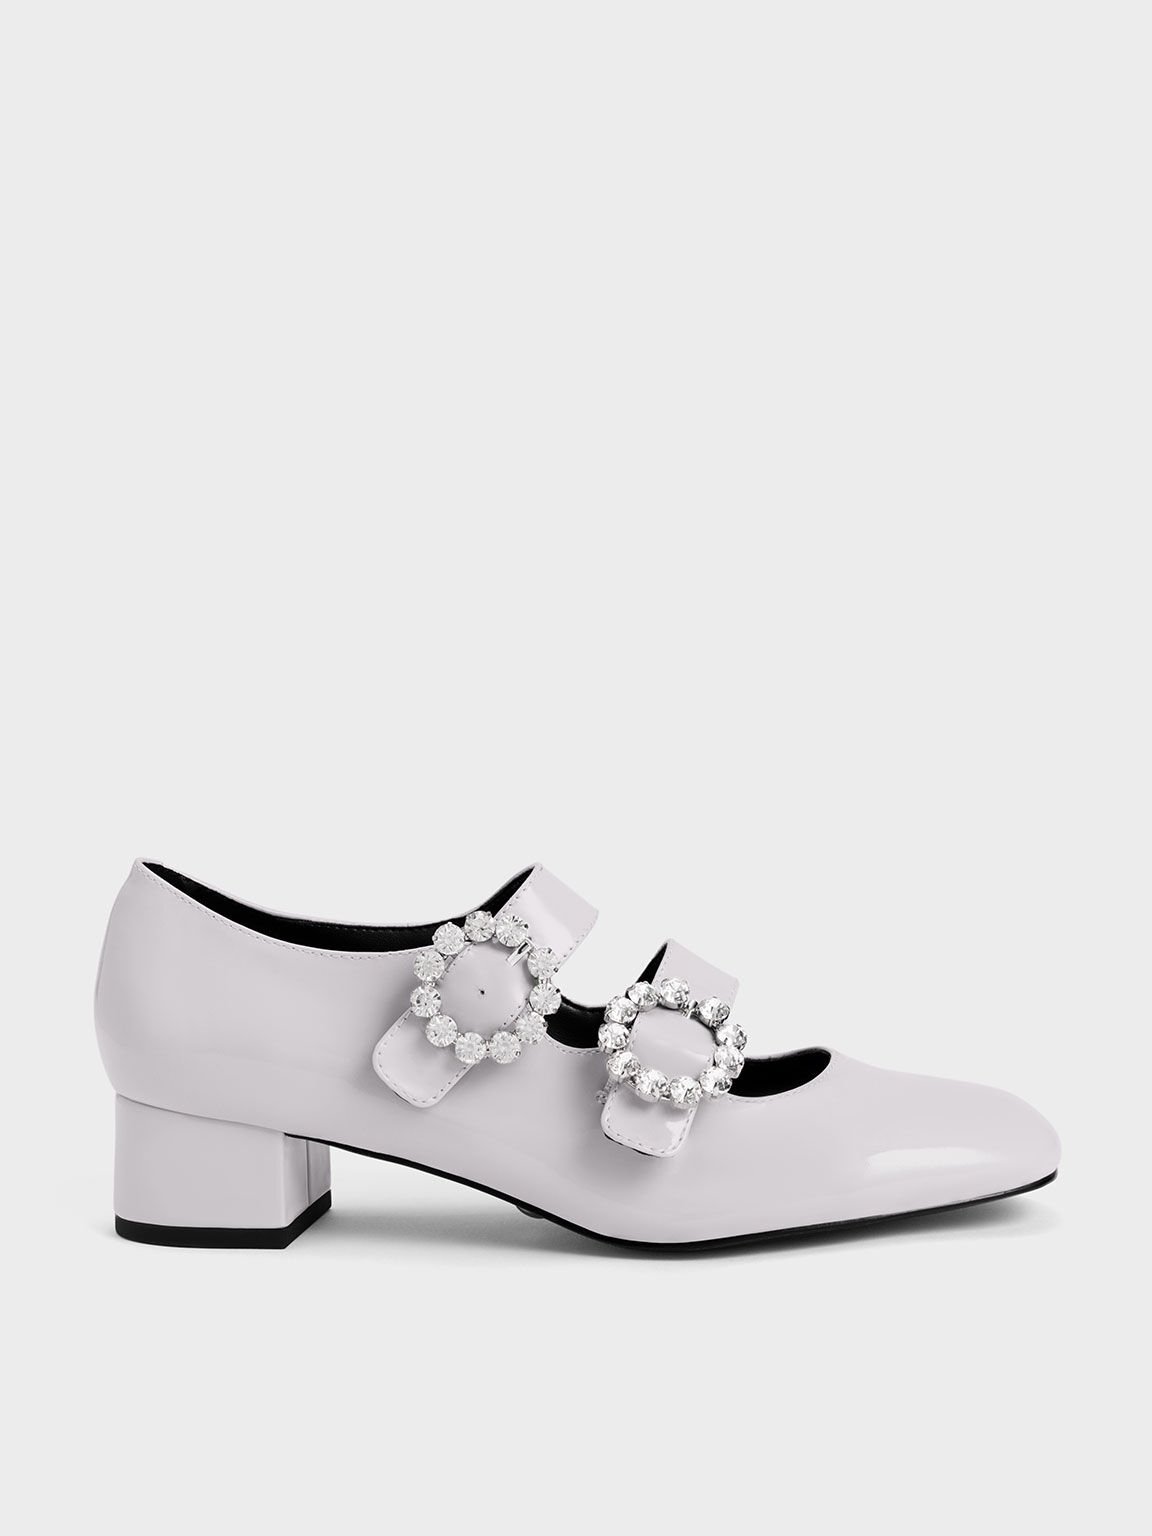 Embellished Buckle Patent Mary Janes, Lilac, hi-res